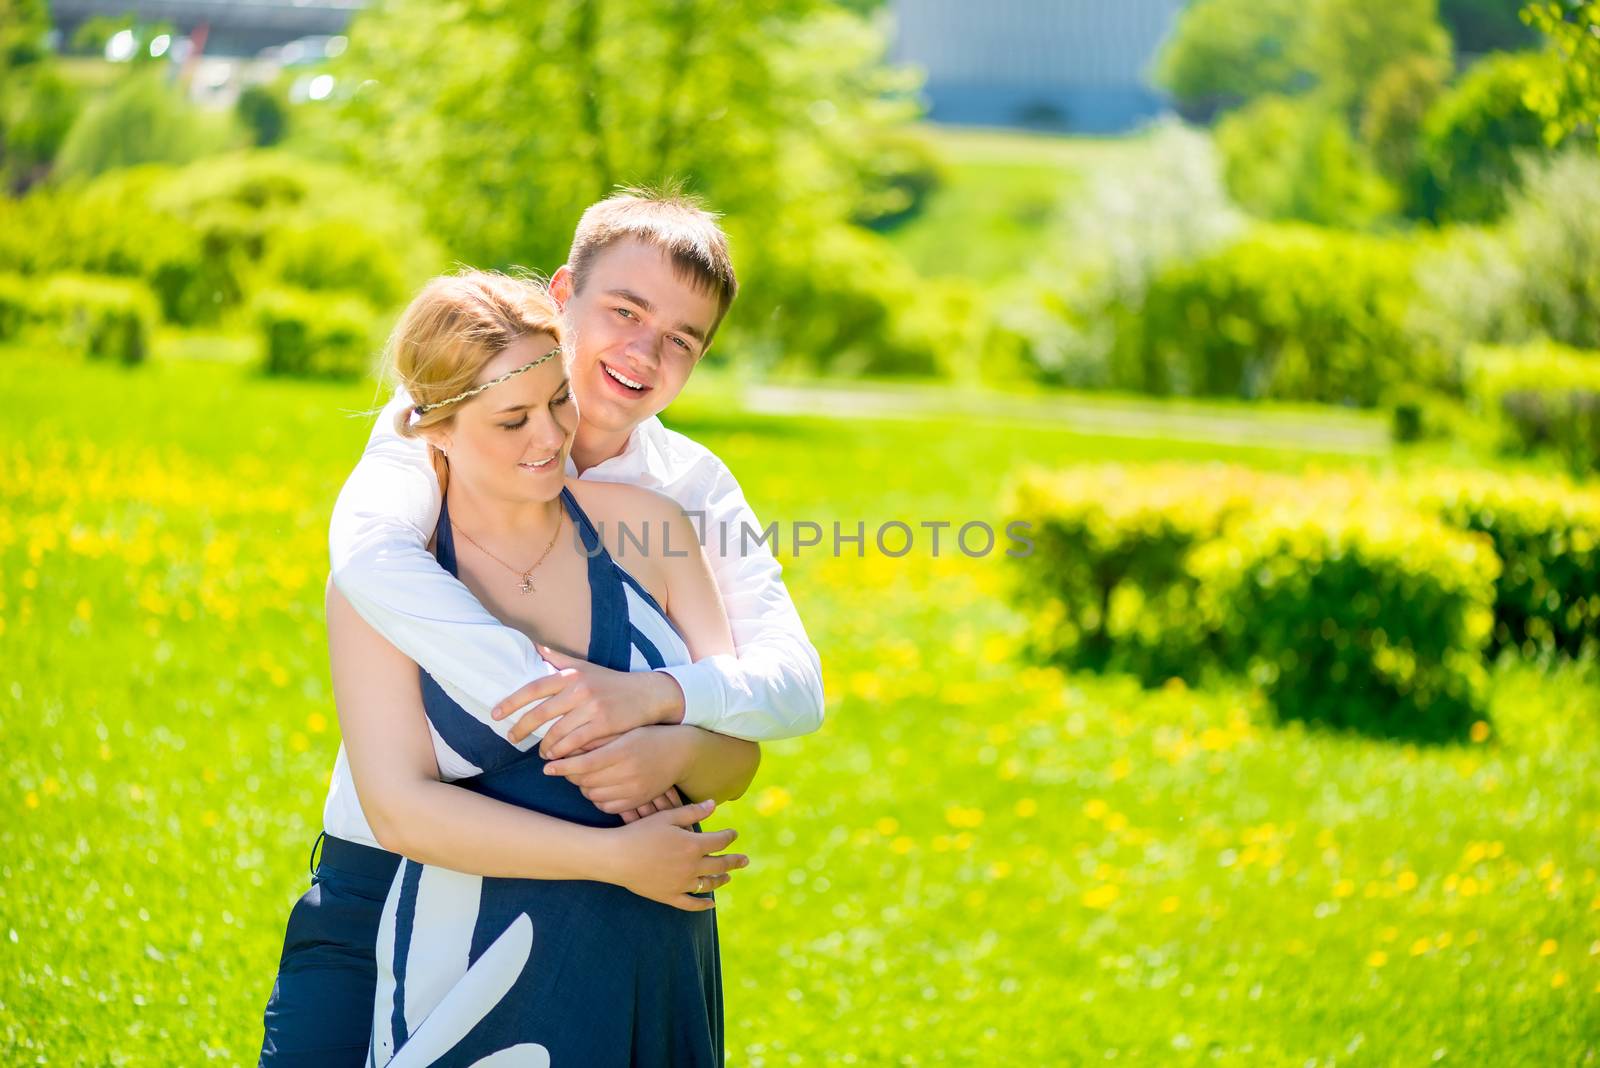 embrace of the man she loved and the future dads